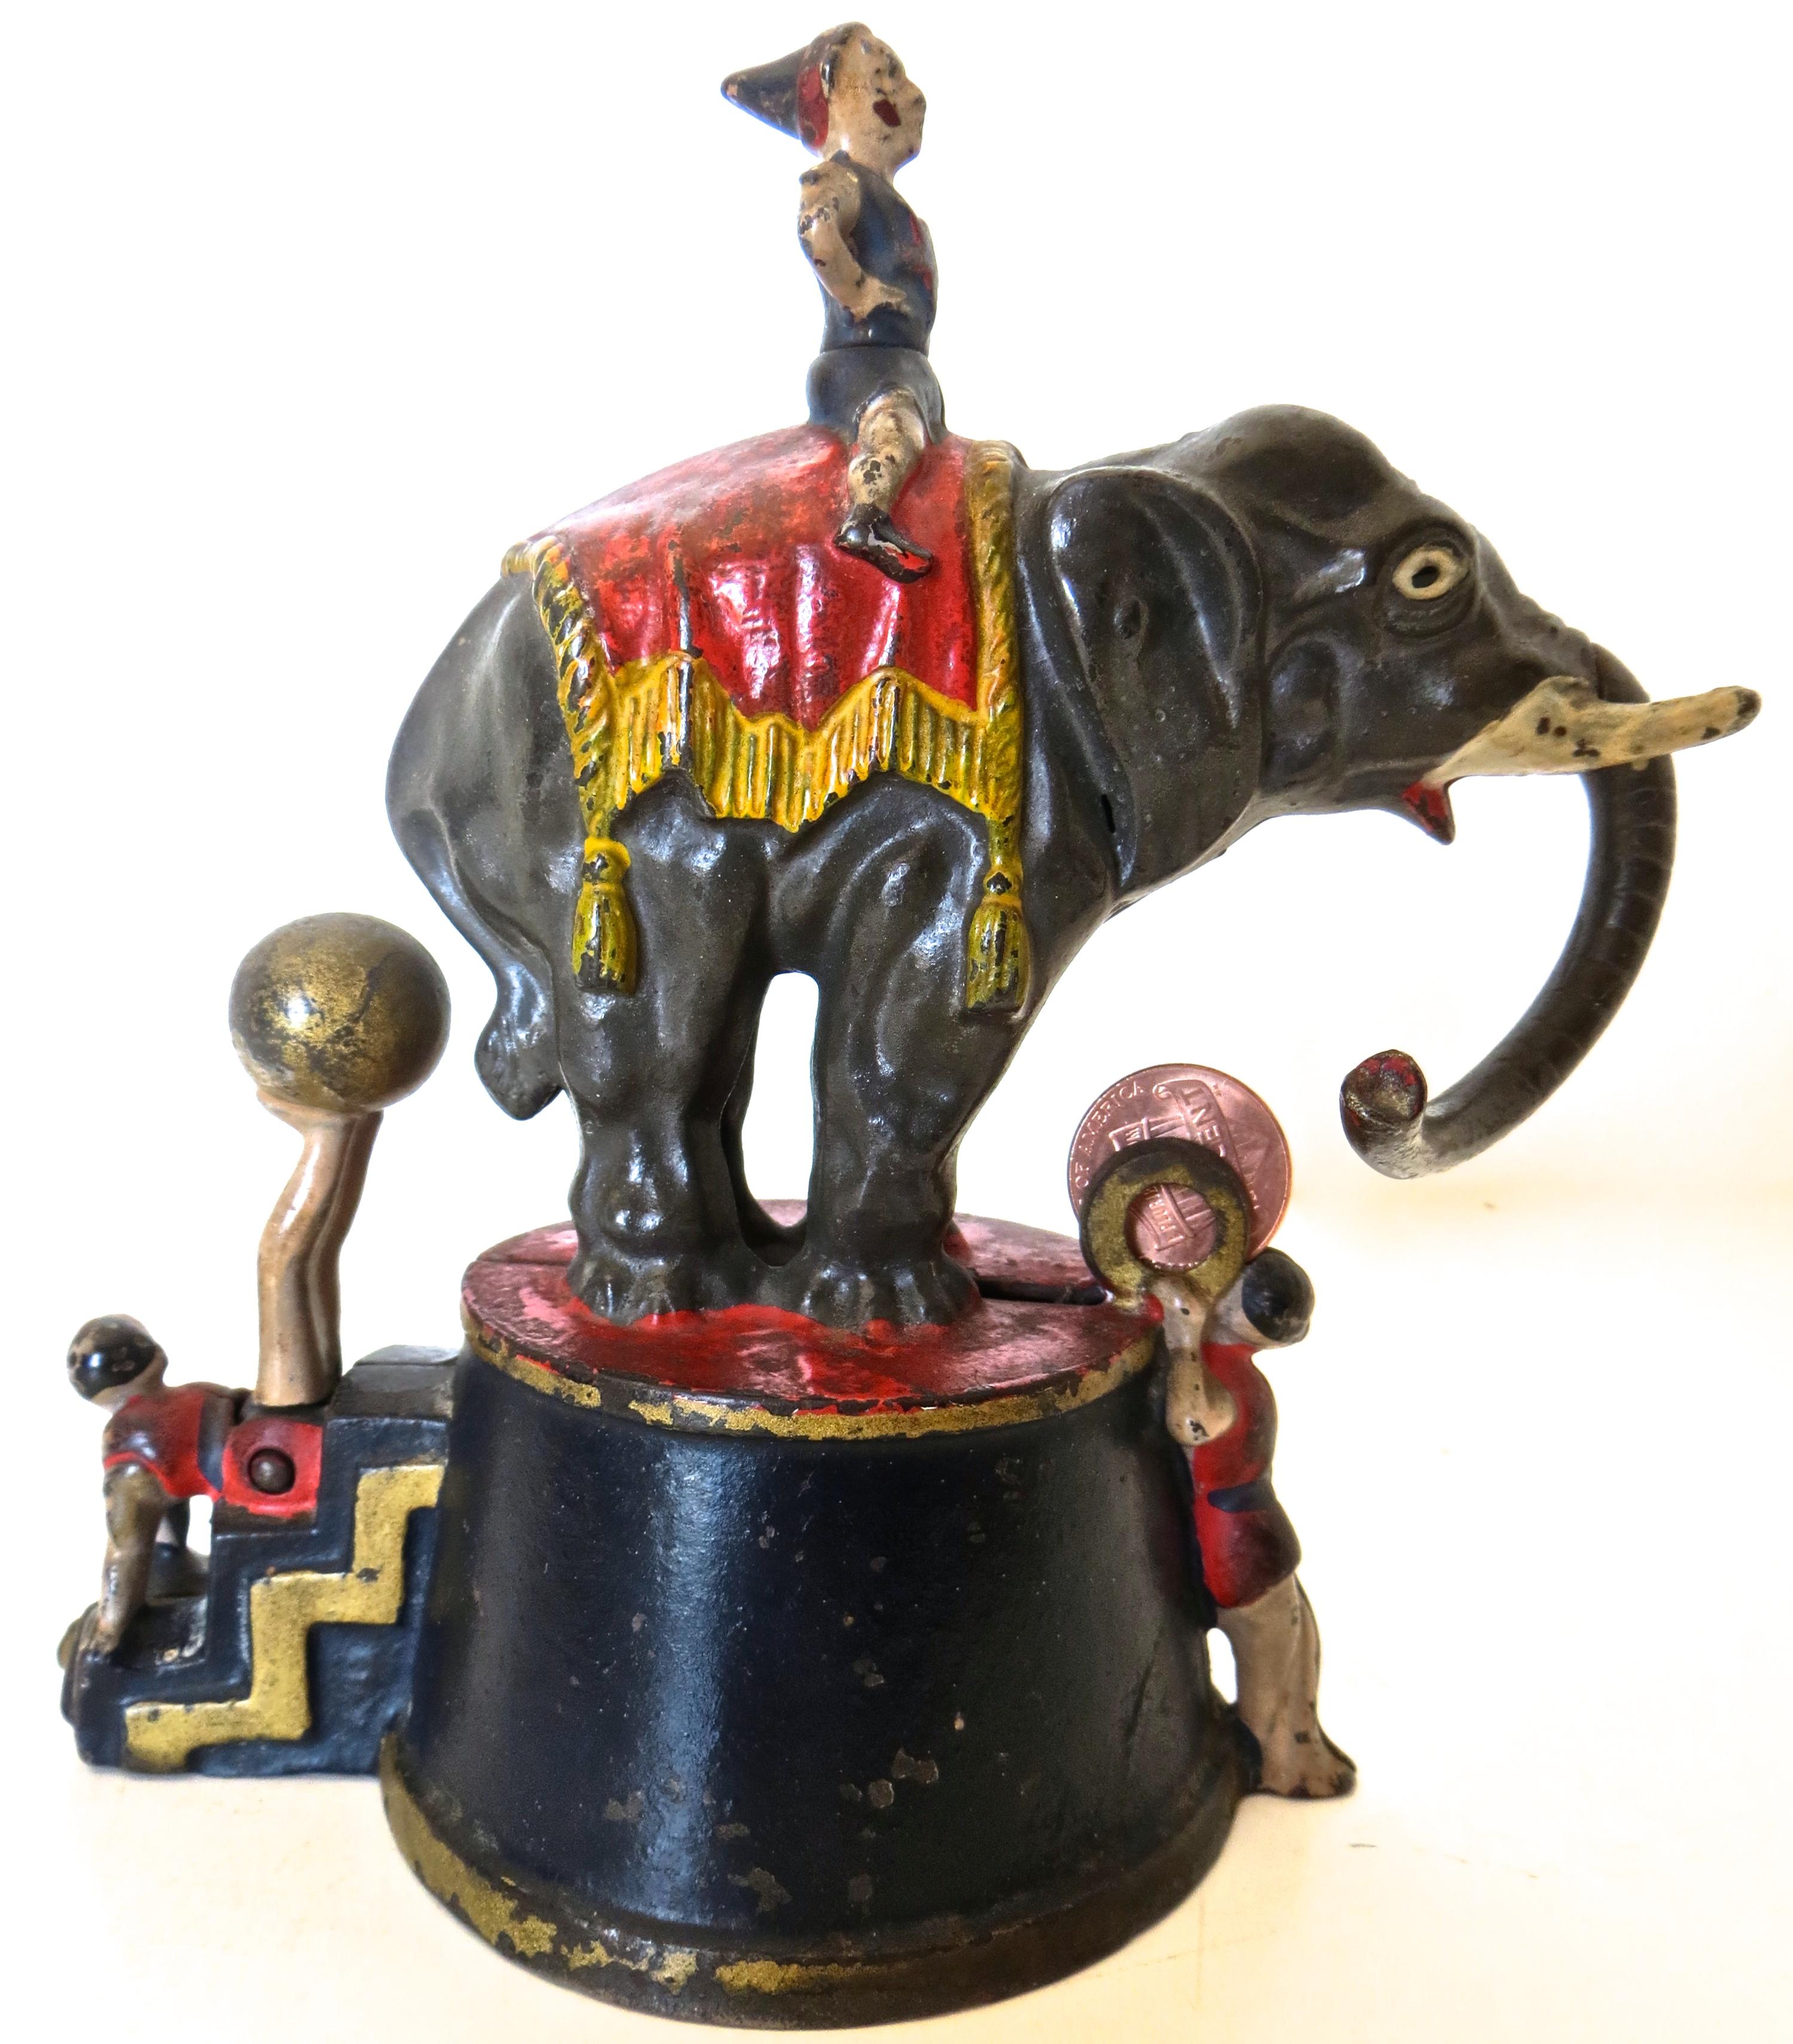 This is a highly desirable bank combining the rare trifecta of; action, subject matter, and universal shelf appeal.
“Elephant and Three Clowns” mechanical bank was manufactured by the Stevens Manufacturing Company, in Cromwell, Connecticut, circa